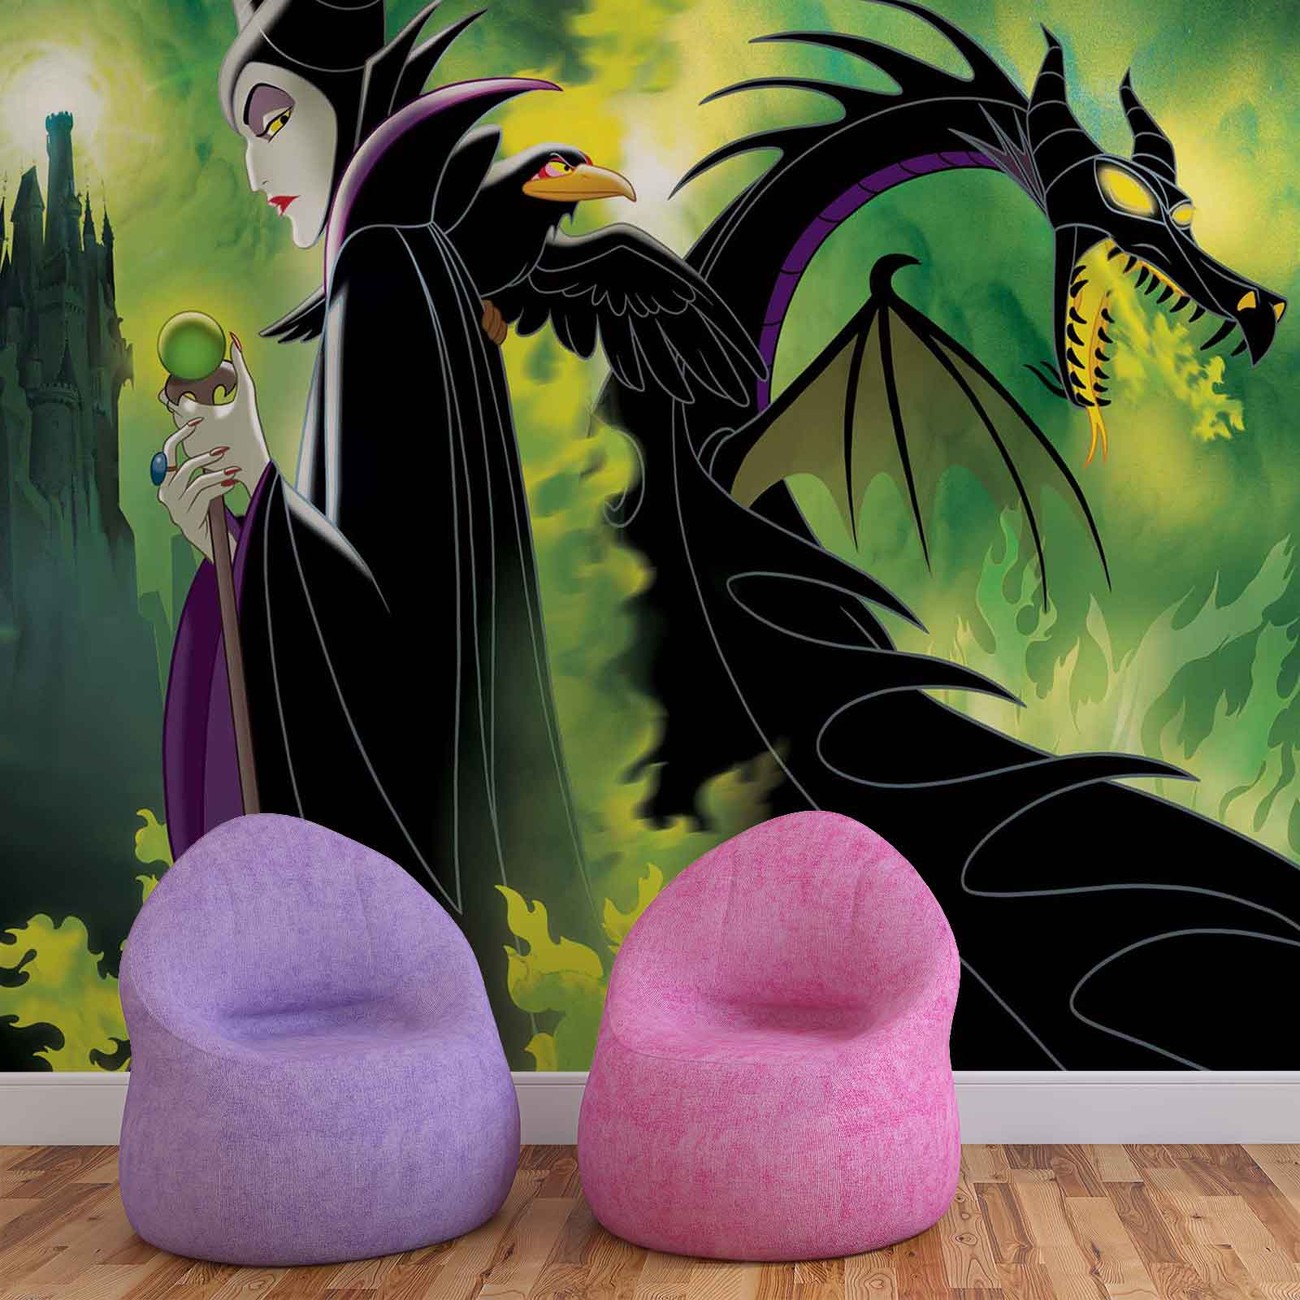 Download Image Disney Maleficent Wall Paper Mural Buy at.